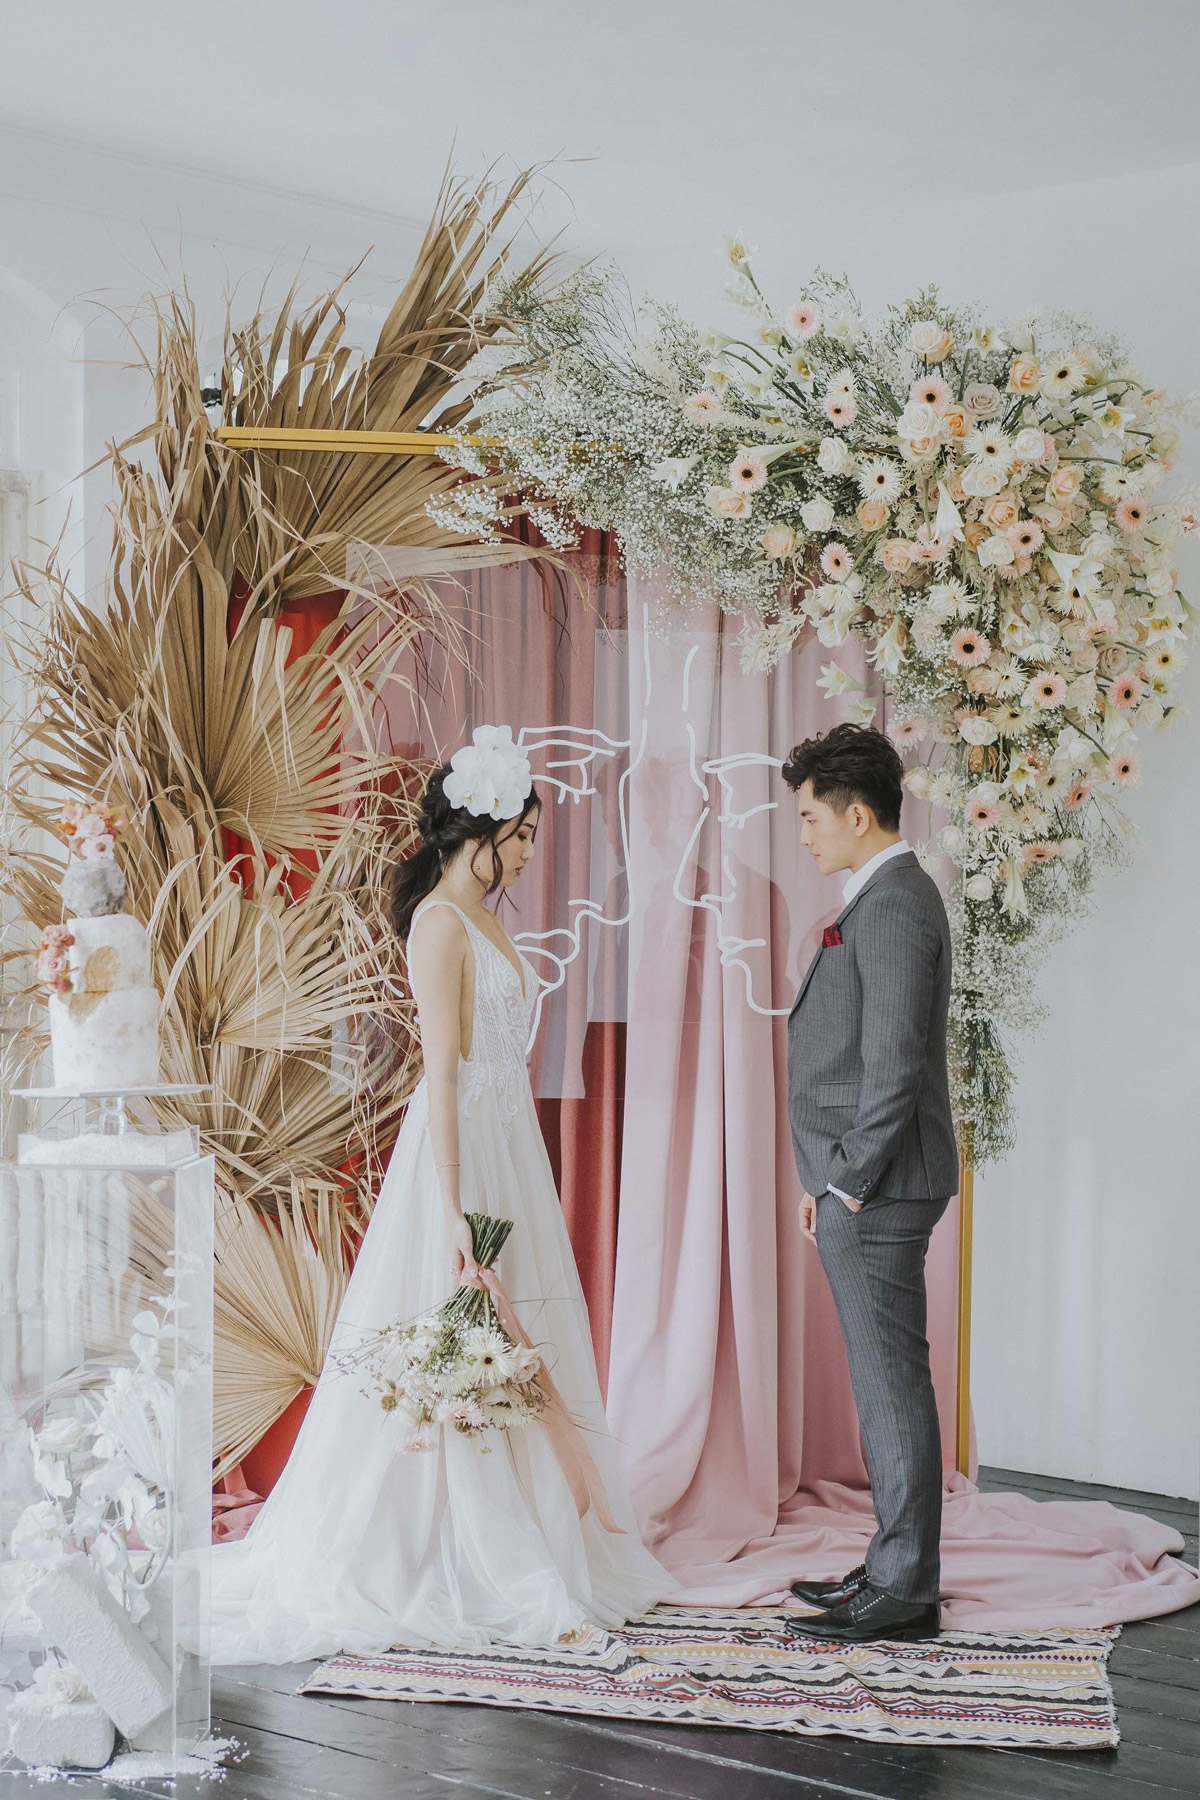 5 Wedding Decorations You Need for an Incomparably Breathtaking Wedding